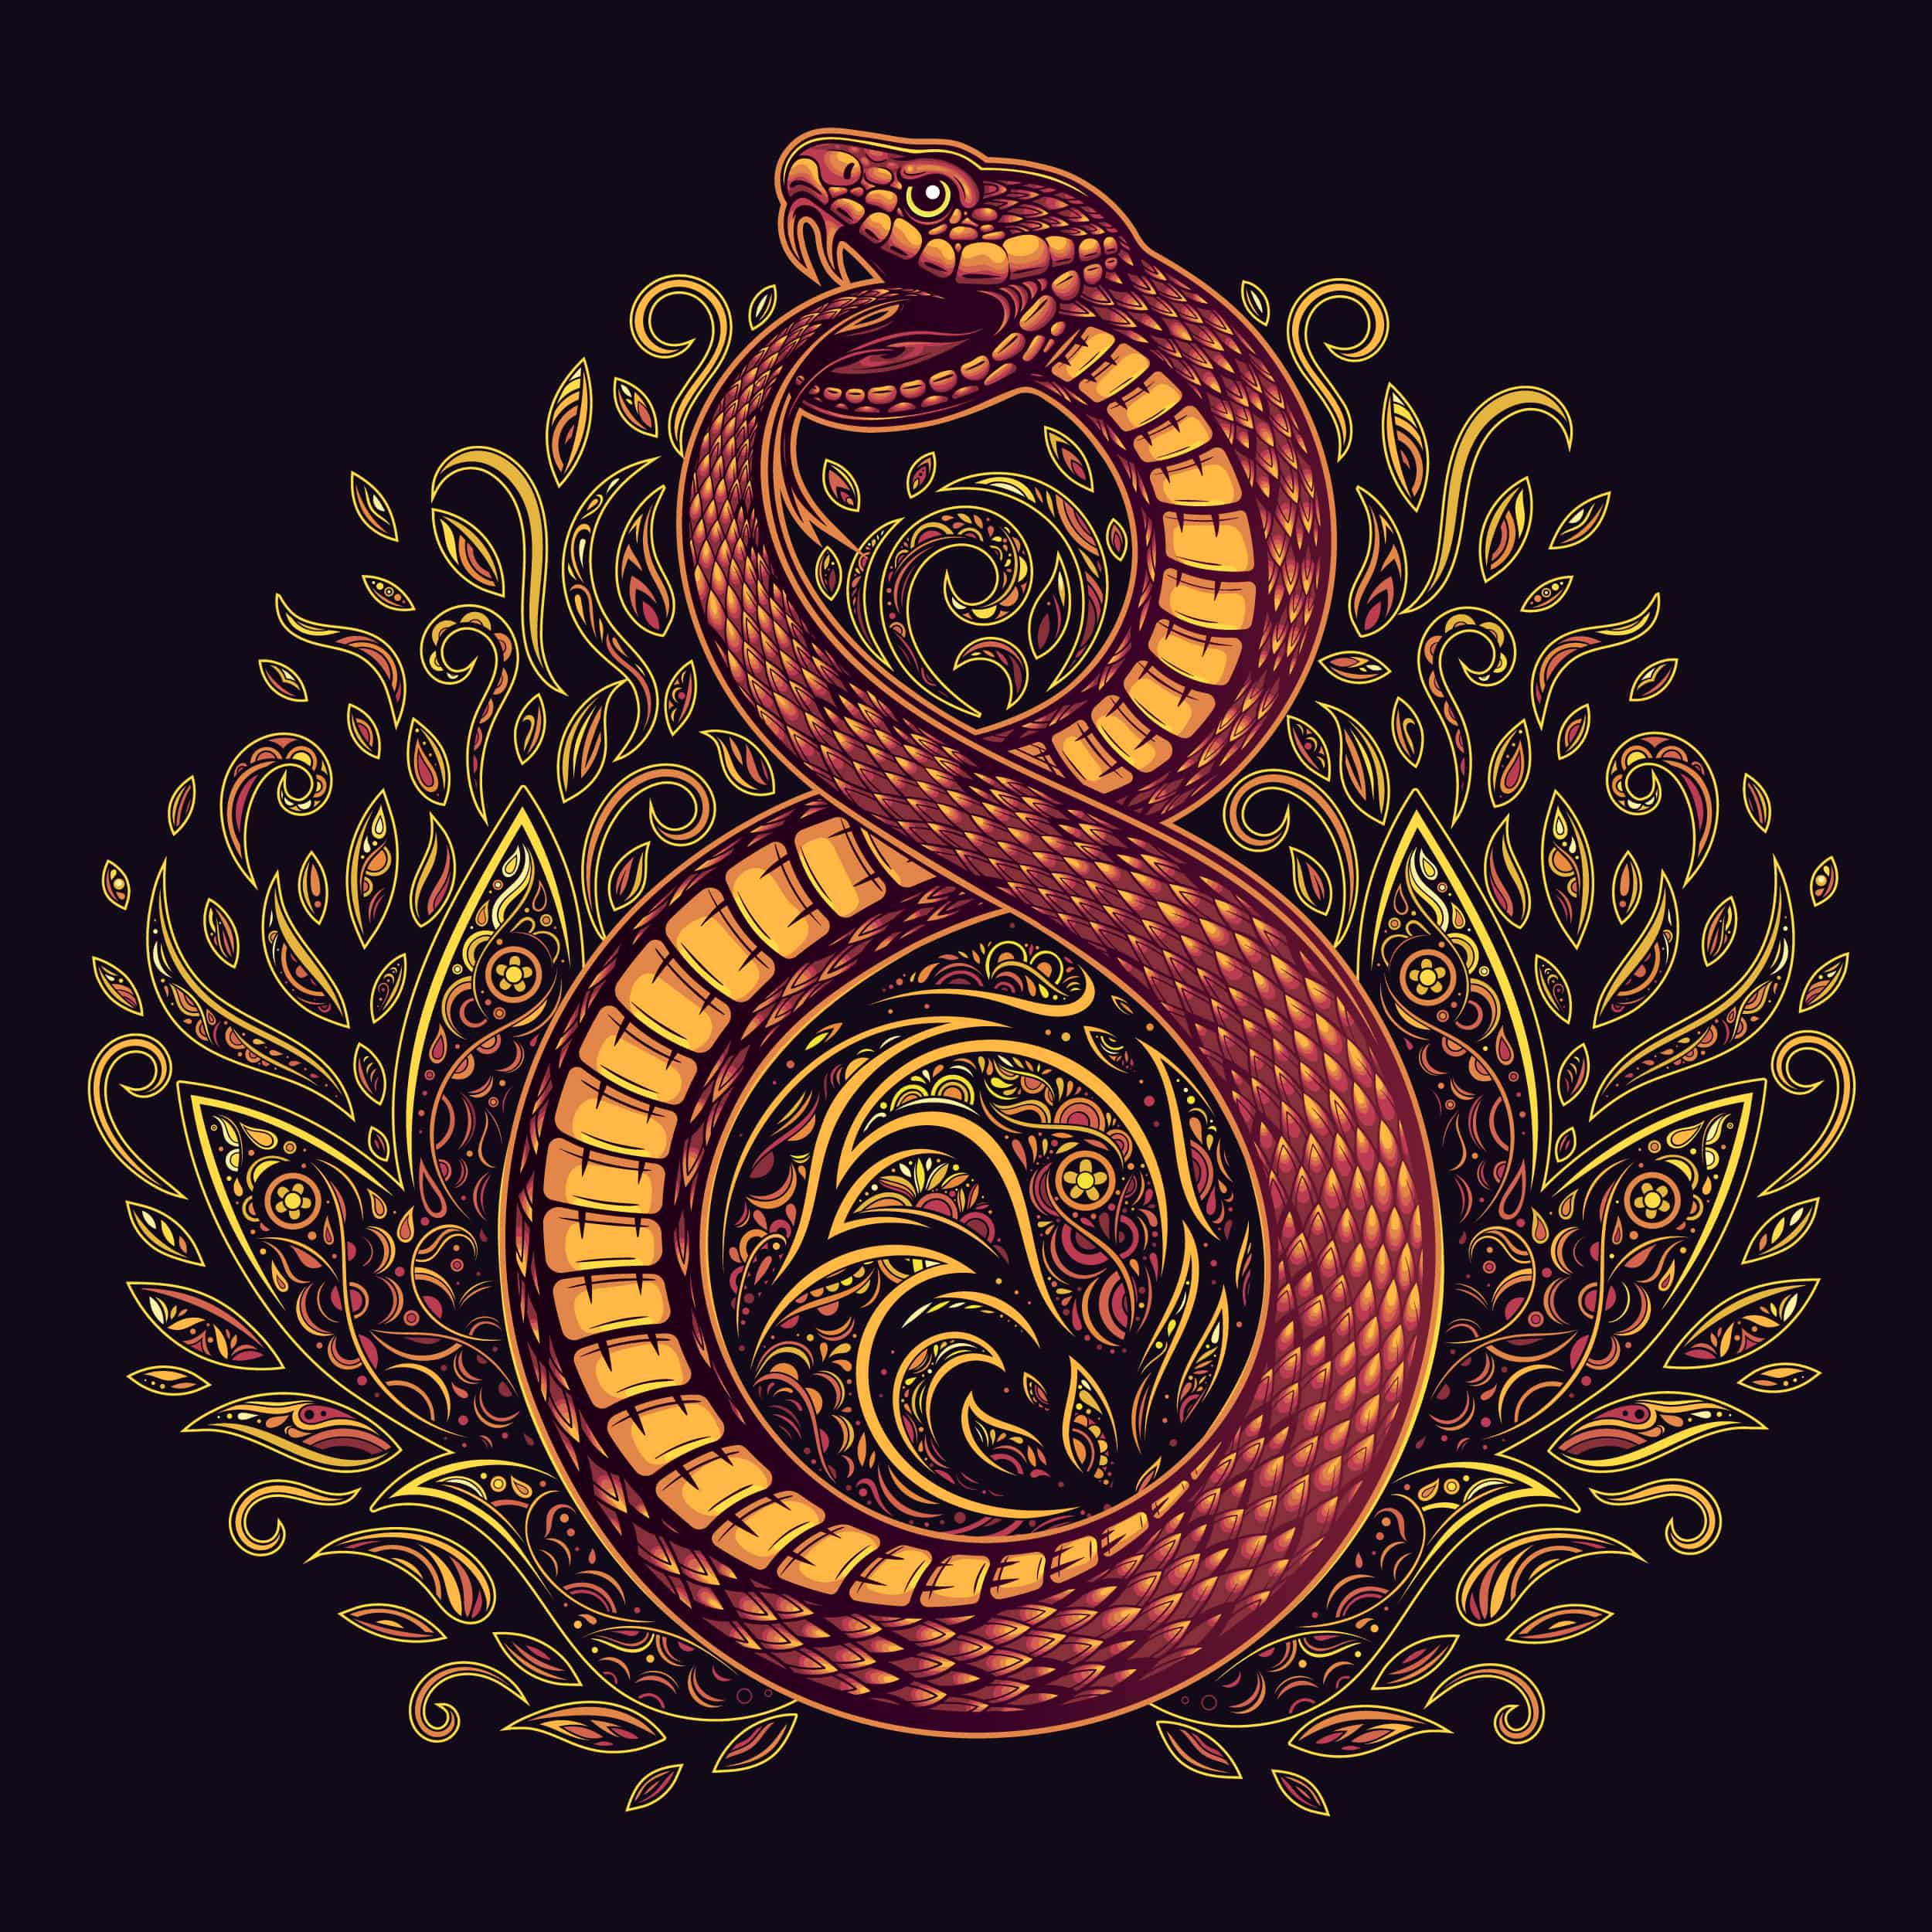 Ouroboros-Snake-Eating-Its-Tail-Infinity-Symbol.jpg